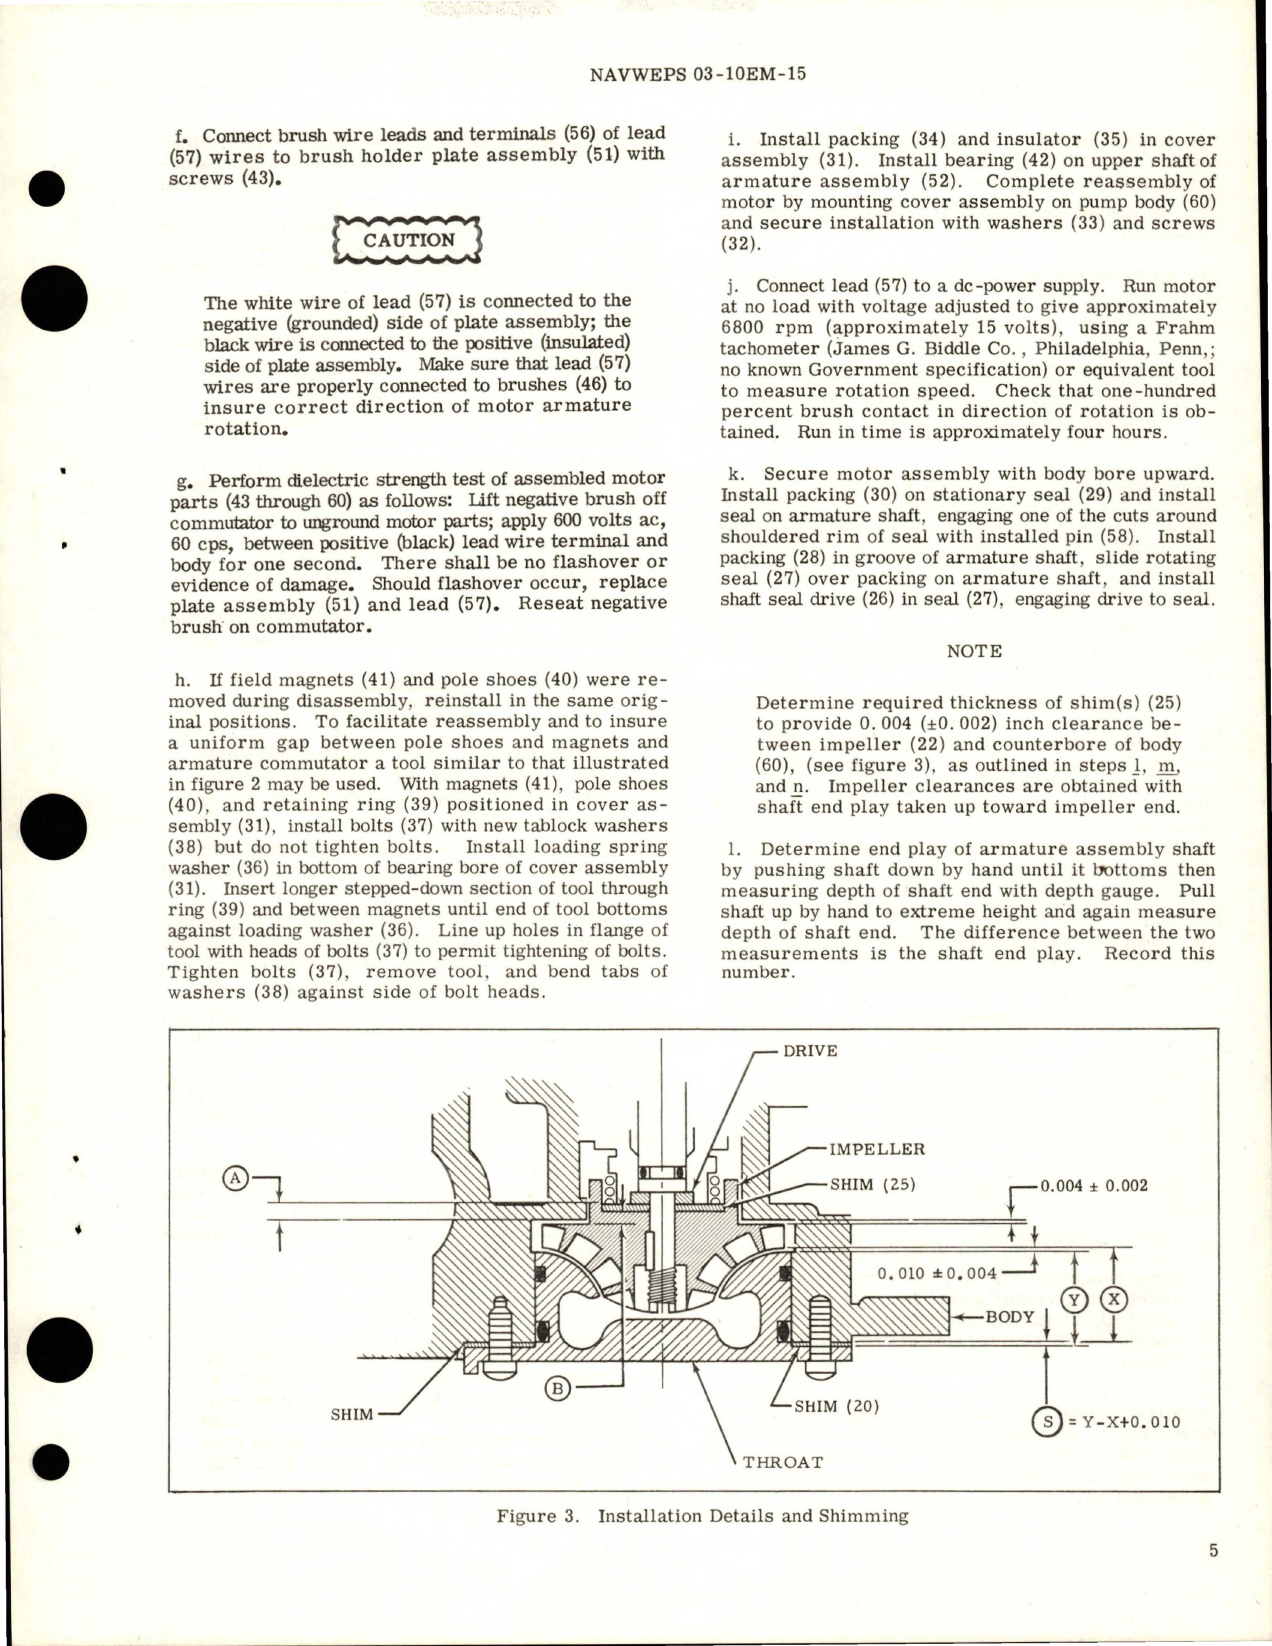 Sample page 7 from AirCorps Library document: Overhaul Instructions with Parts for Fuel Booster Pump - Part 56881